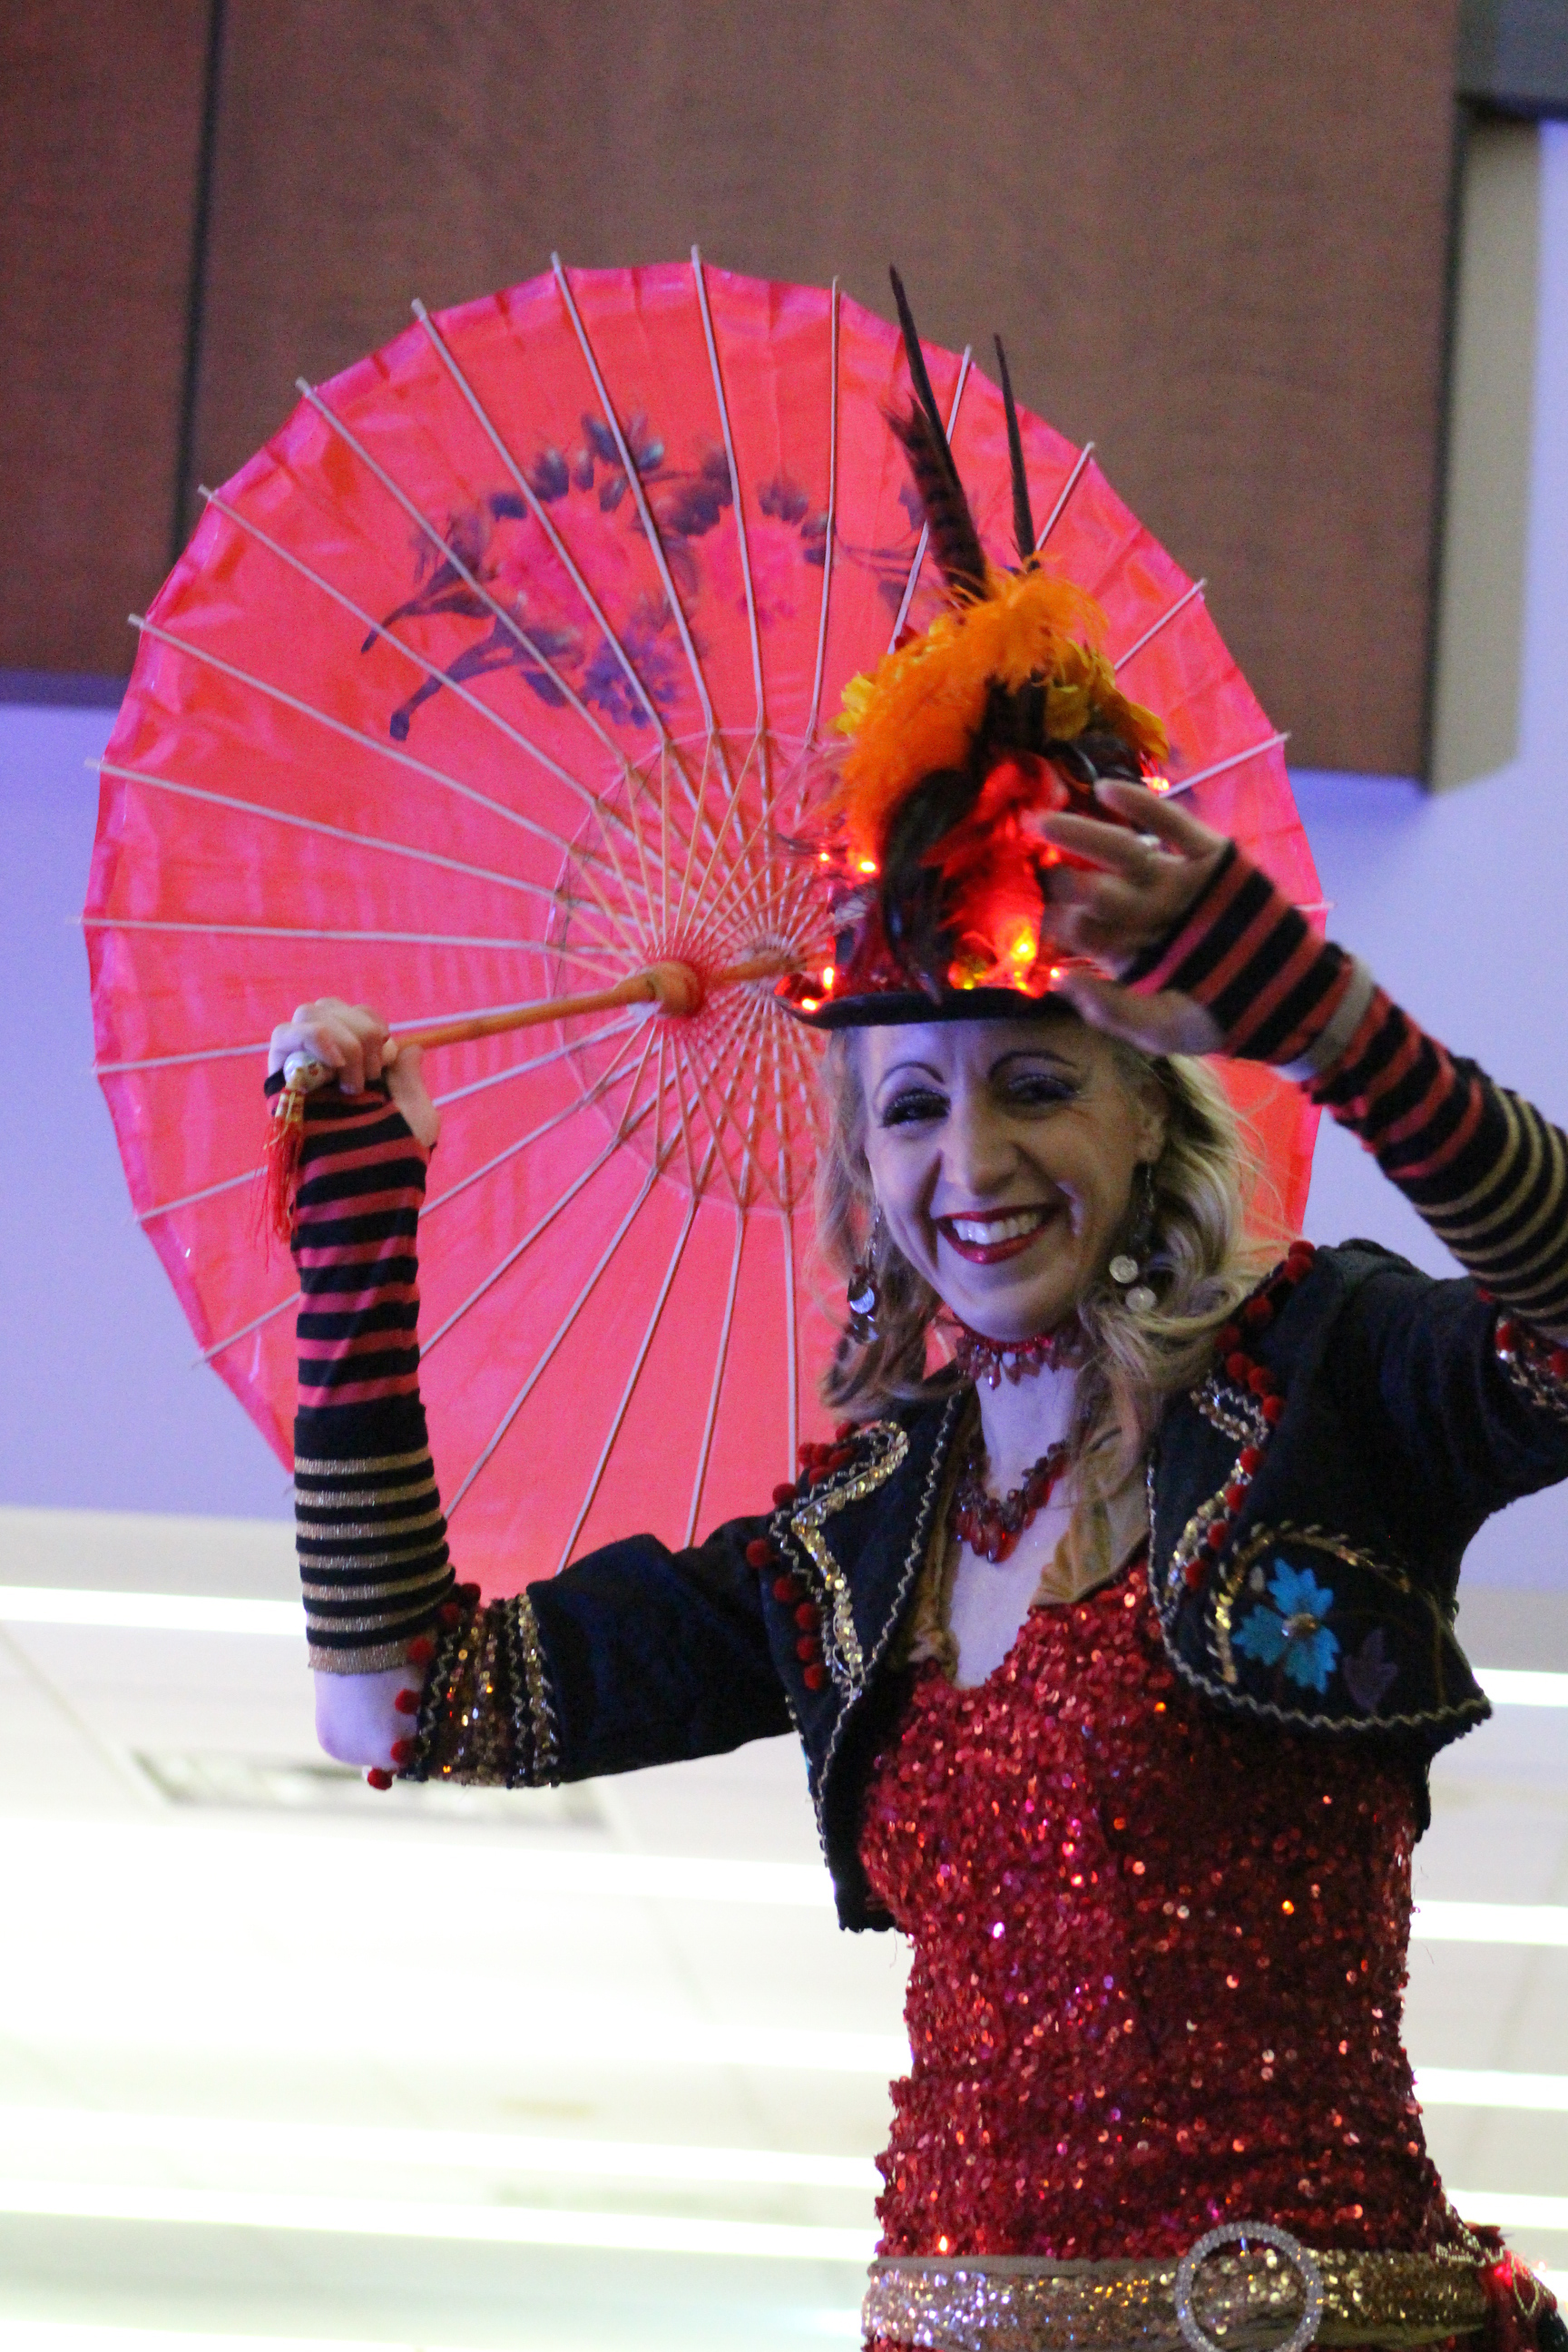 Woman wearing ringleader costume carrying red parasol